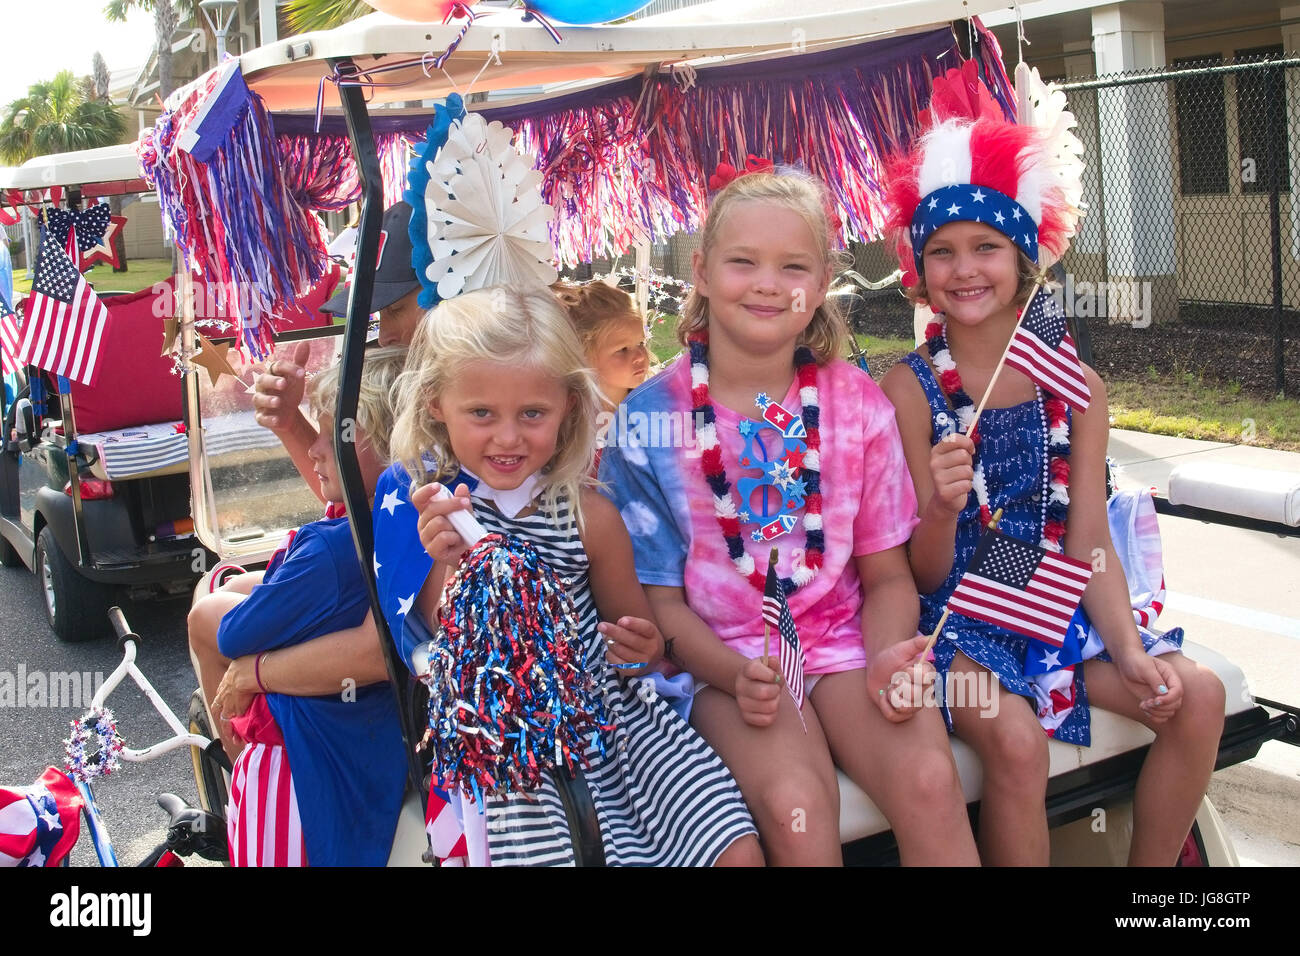 Sullivan's Island, South Carolina, USA. 4th July, 2017. Young girls smile as they ride along in a golf cart decorated in patriotic bunting during the annual Sullivan's Island Independence Day parade July 4, 2017 in Sullivan's Island, South Carolina. The tiny affluent sea island hosts a bicycle and golf cart parade through the historic village. Credit: Planetpix/Alamy Live News Stock Photo